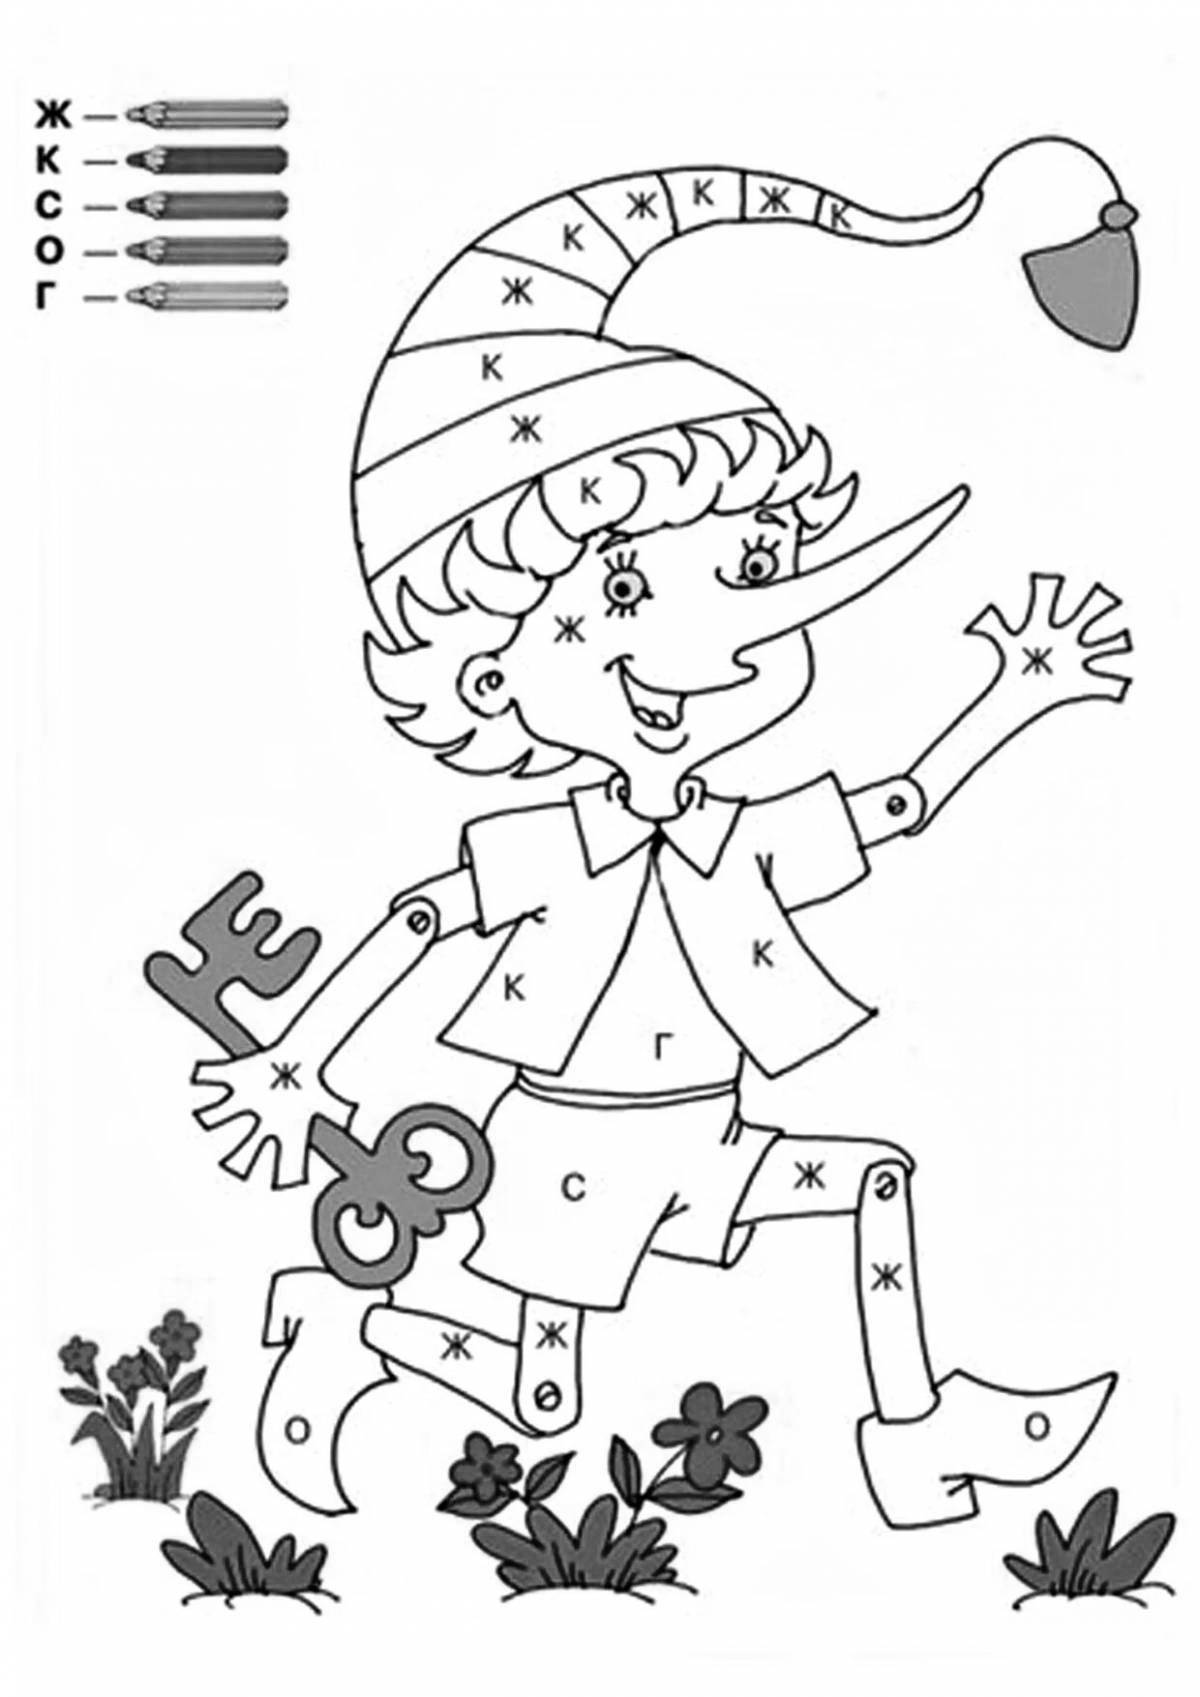 Funny fairy tale coloring by numbers